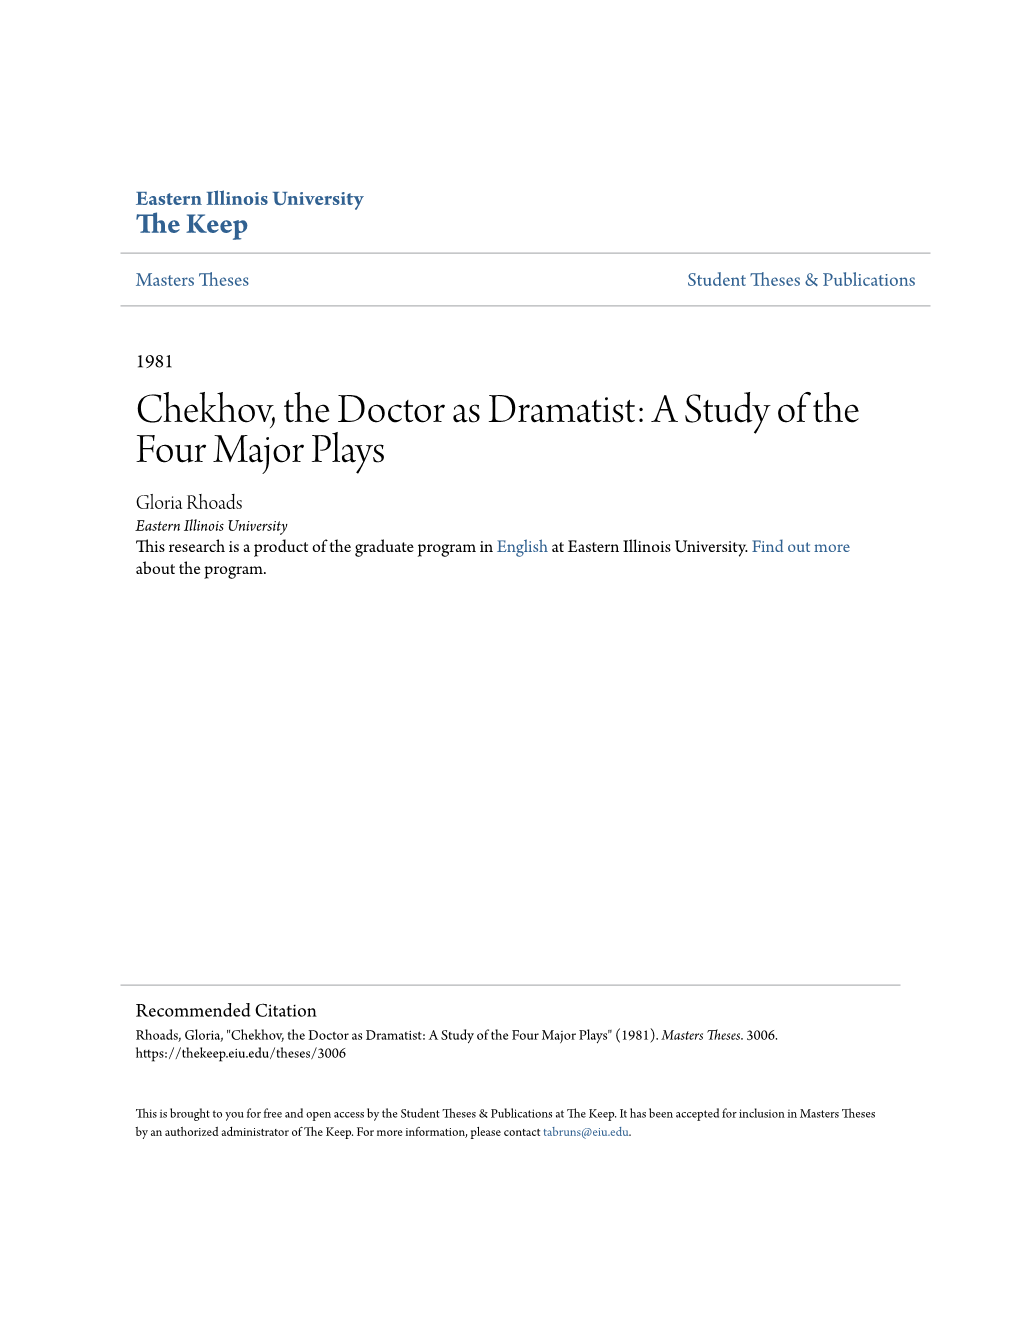 Chekhov, the Doctor As Dramatist: a Study of the Four Major Plays